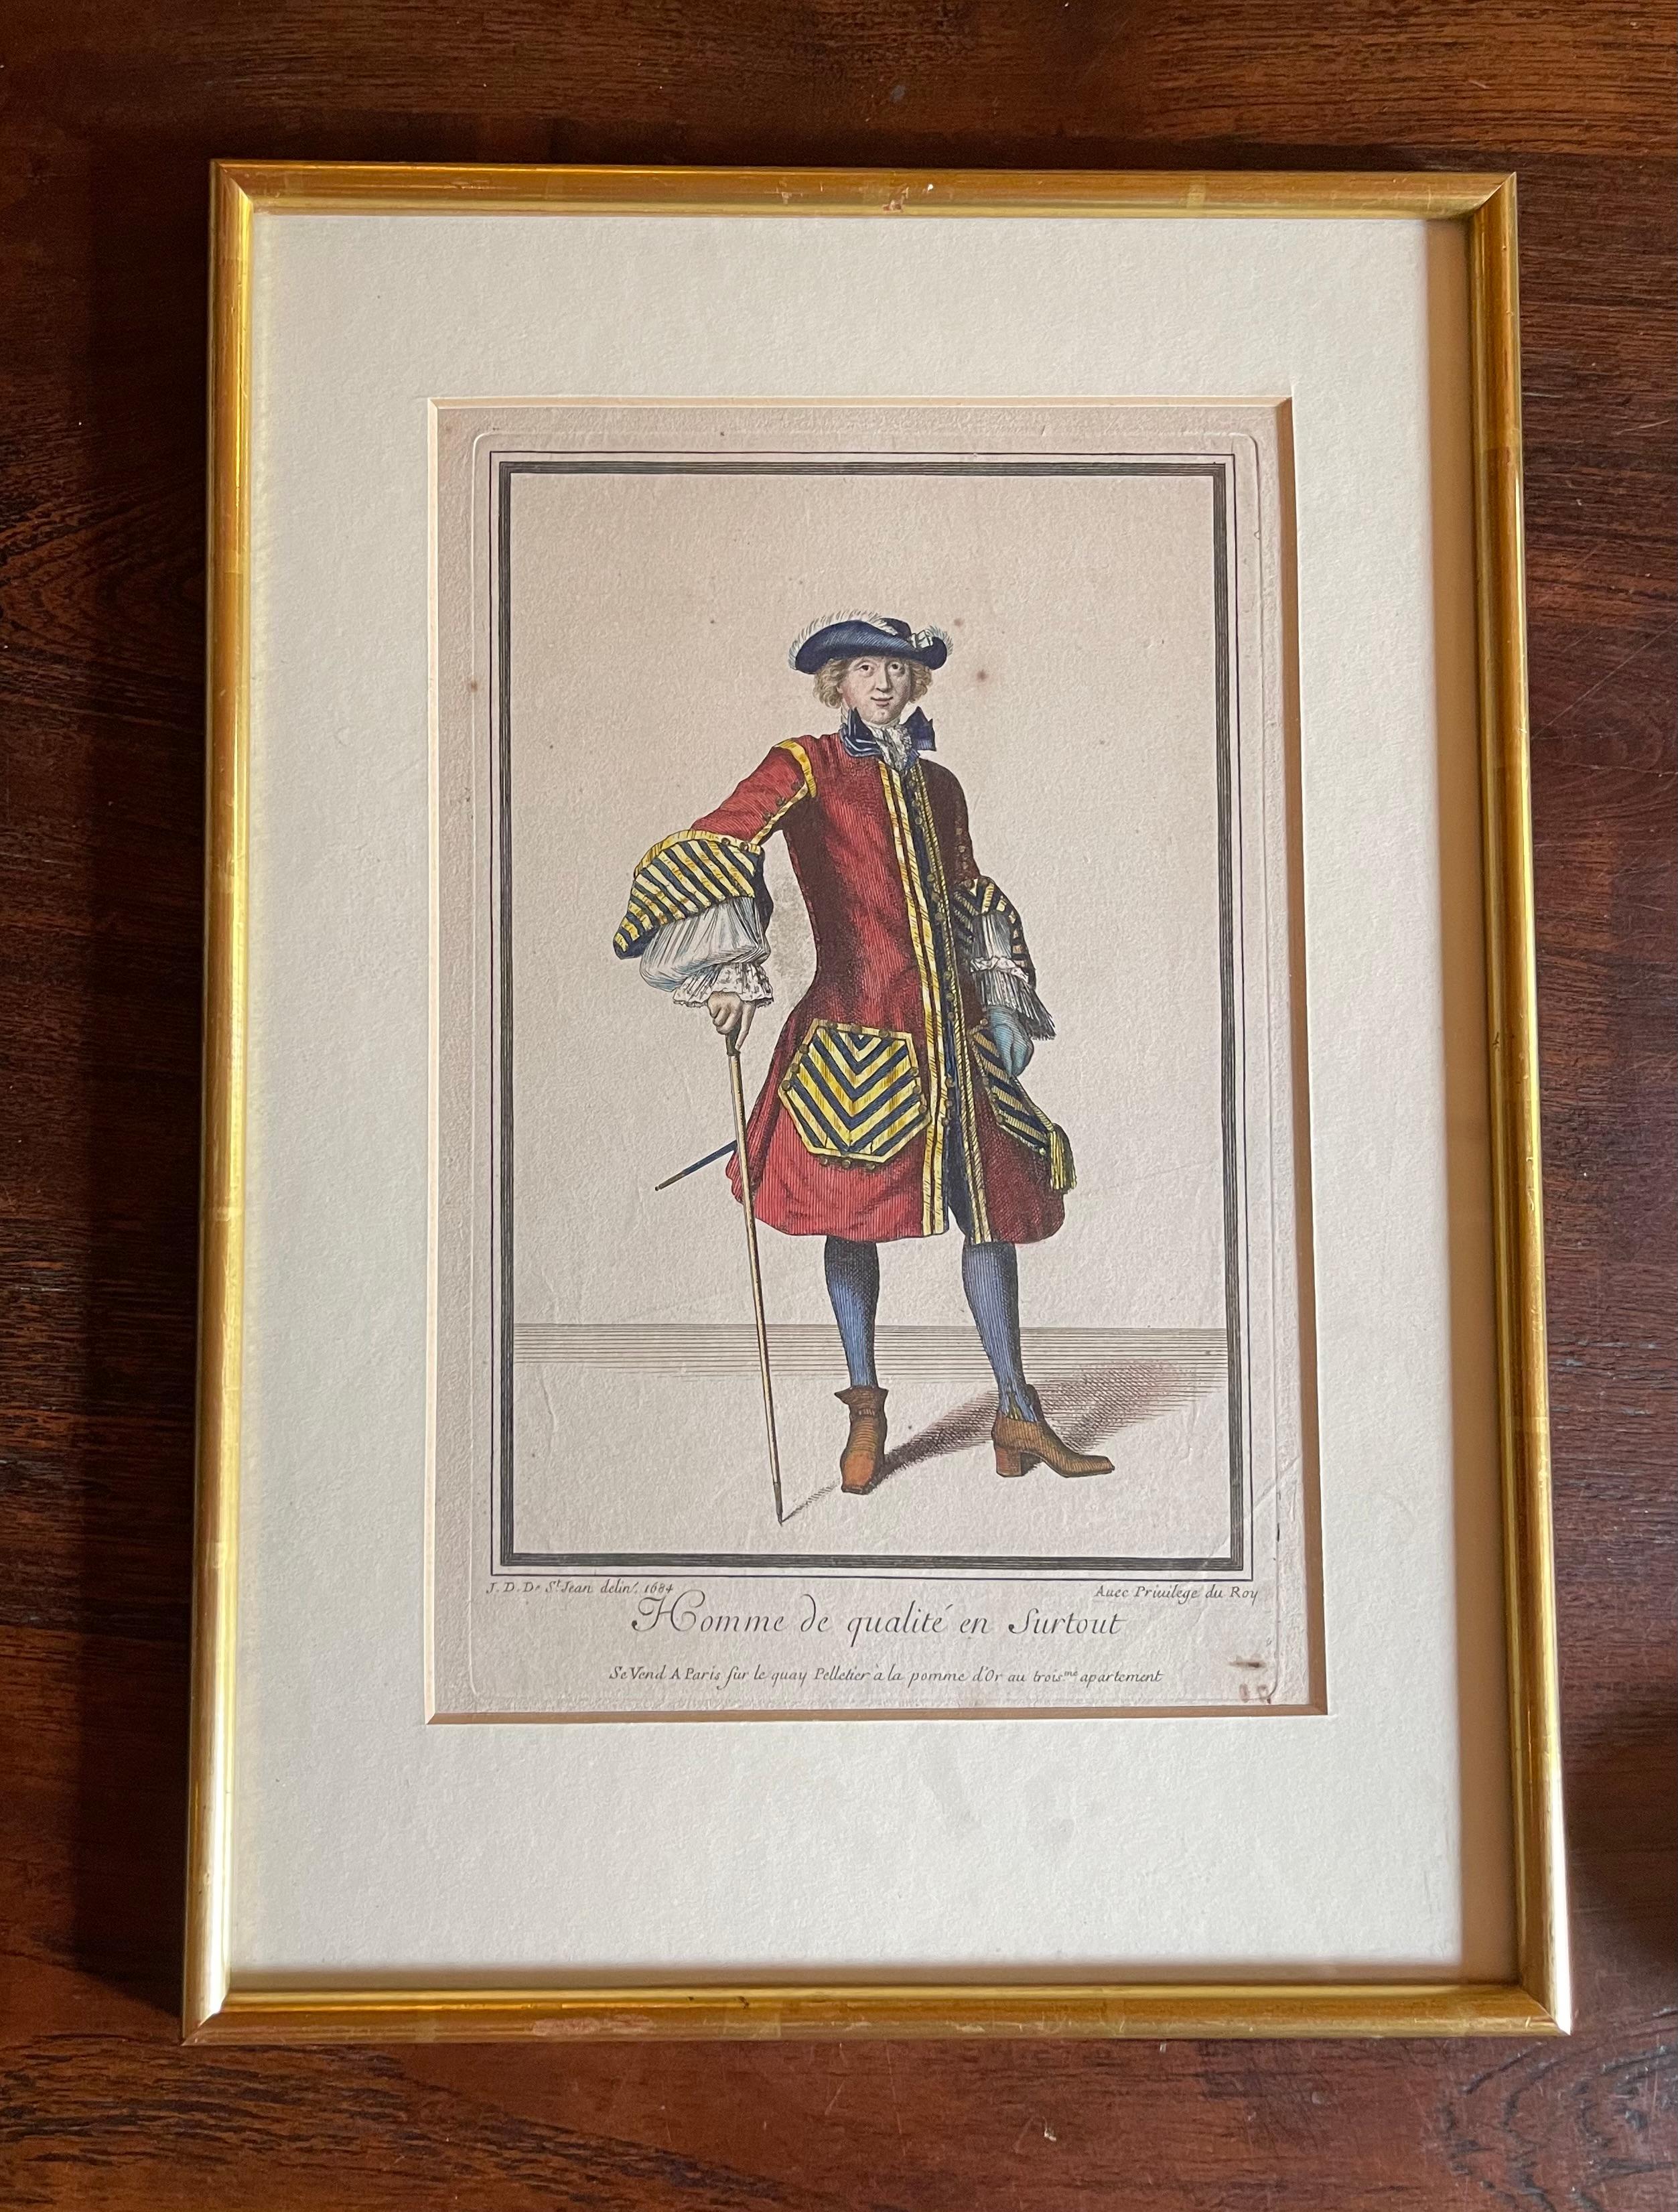 Beautiful engraving of Jean Dieu de Saint-Jean with title 'Homme de qualité en Surtout'
(translated in English: Man of of a particular quality). This original copper engraving is hand colored and framed.

High quality testimony of the fashion